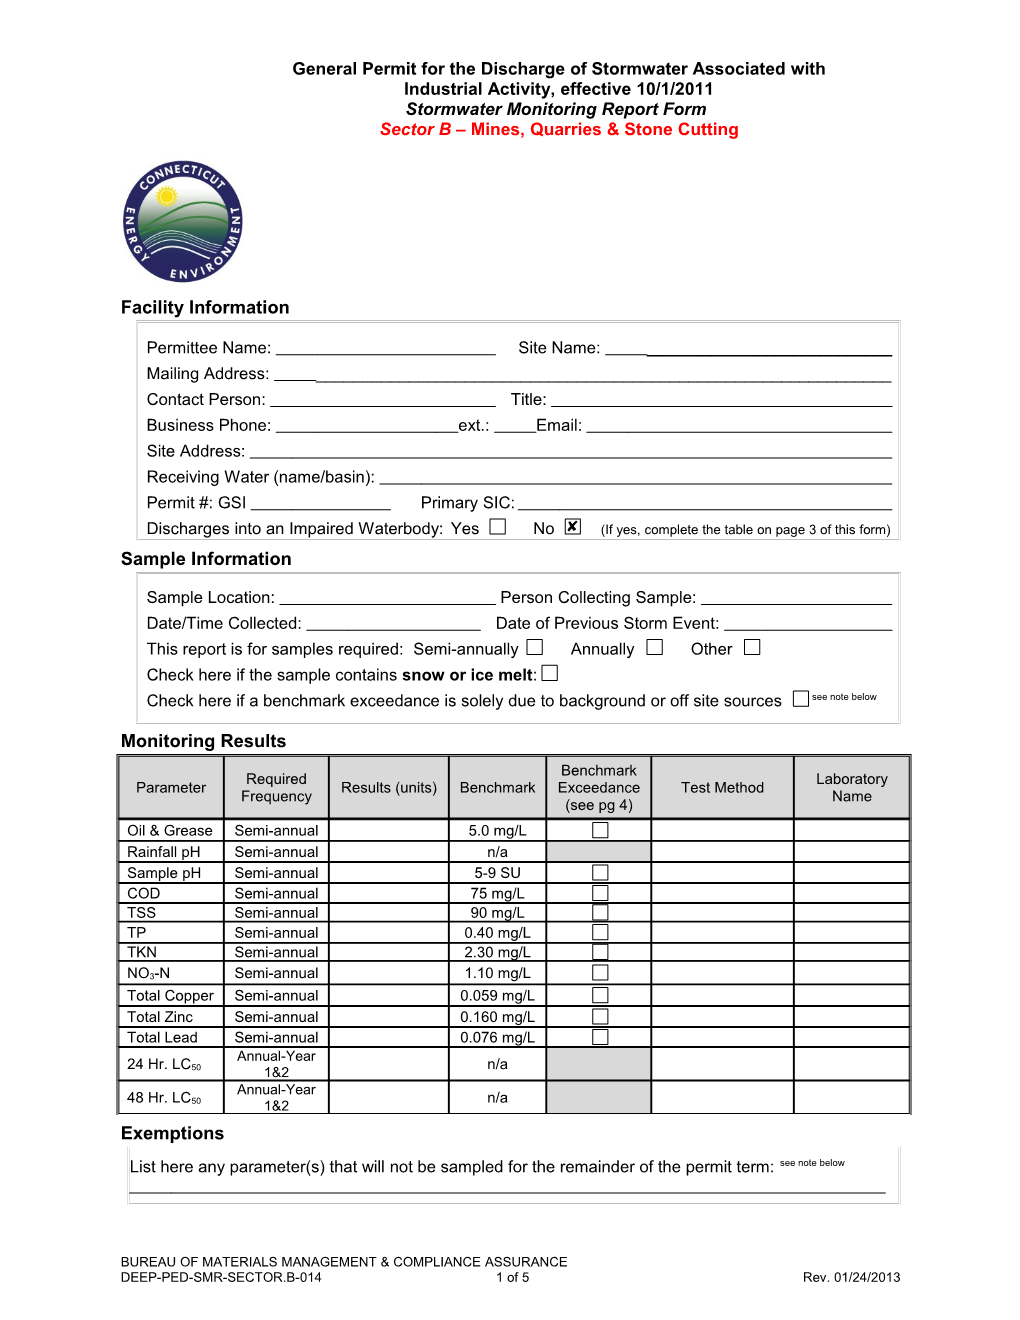 Stormwater Monitoring Report Form Sector B - Mines, Quarries and Stone Cutting